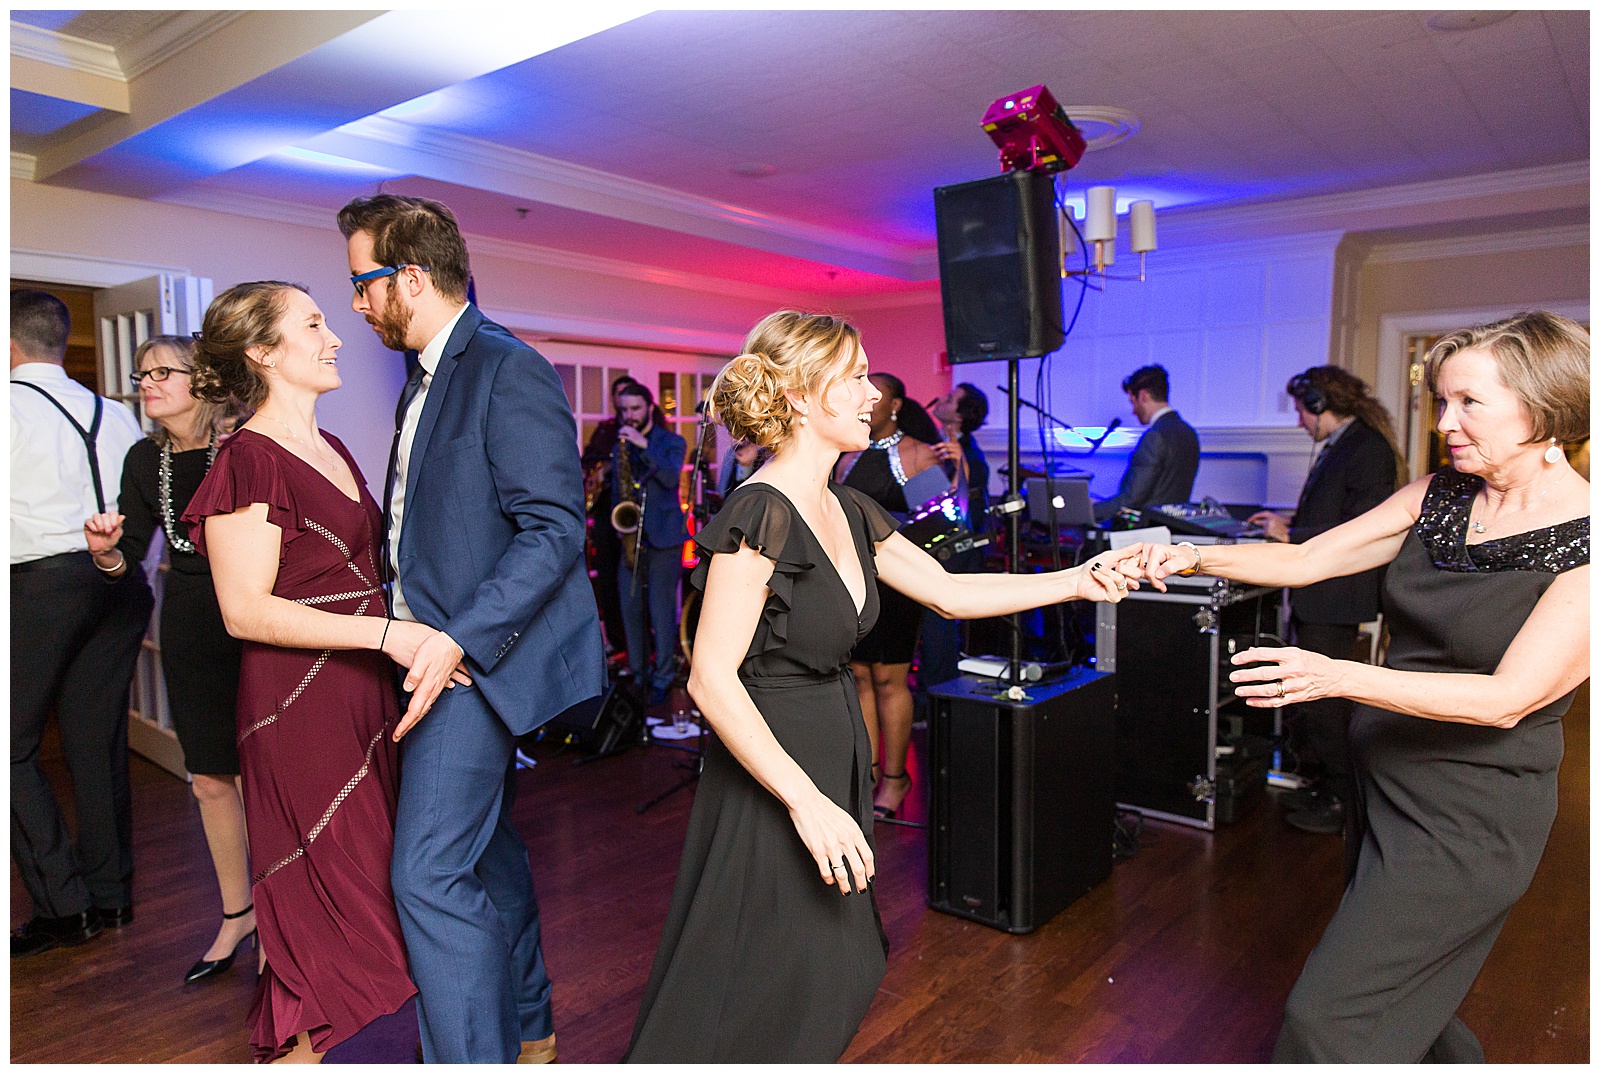 Guests dance the night away to Young Love and the Trills